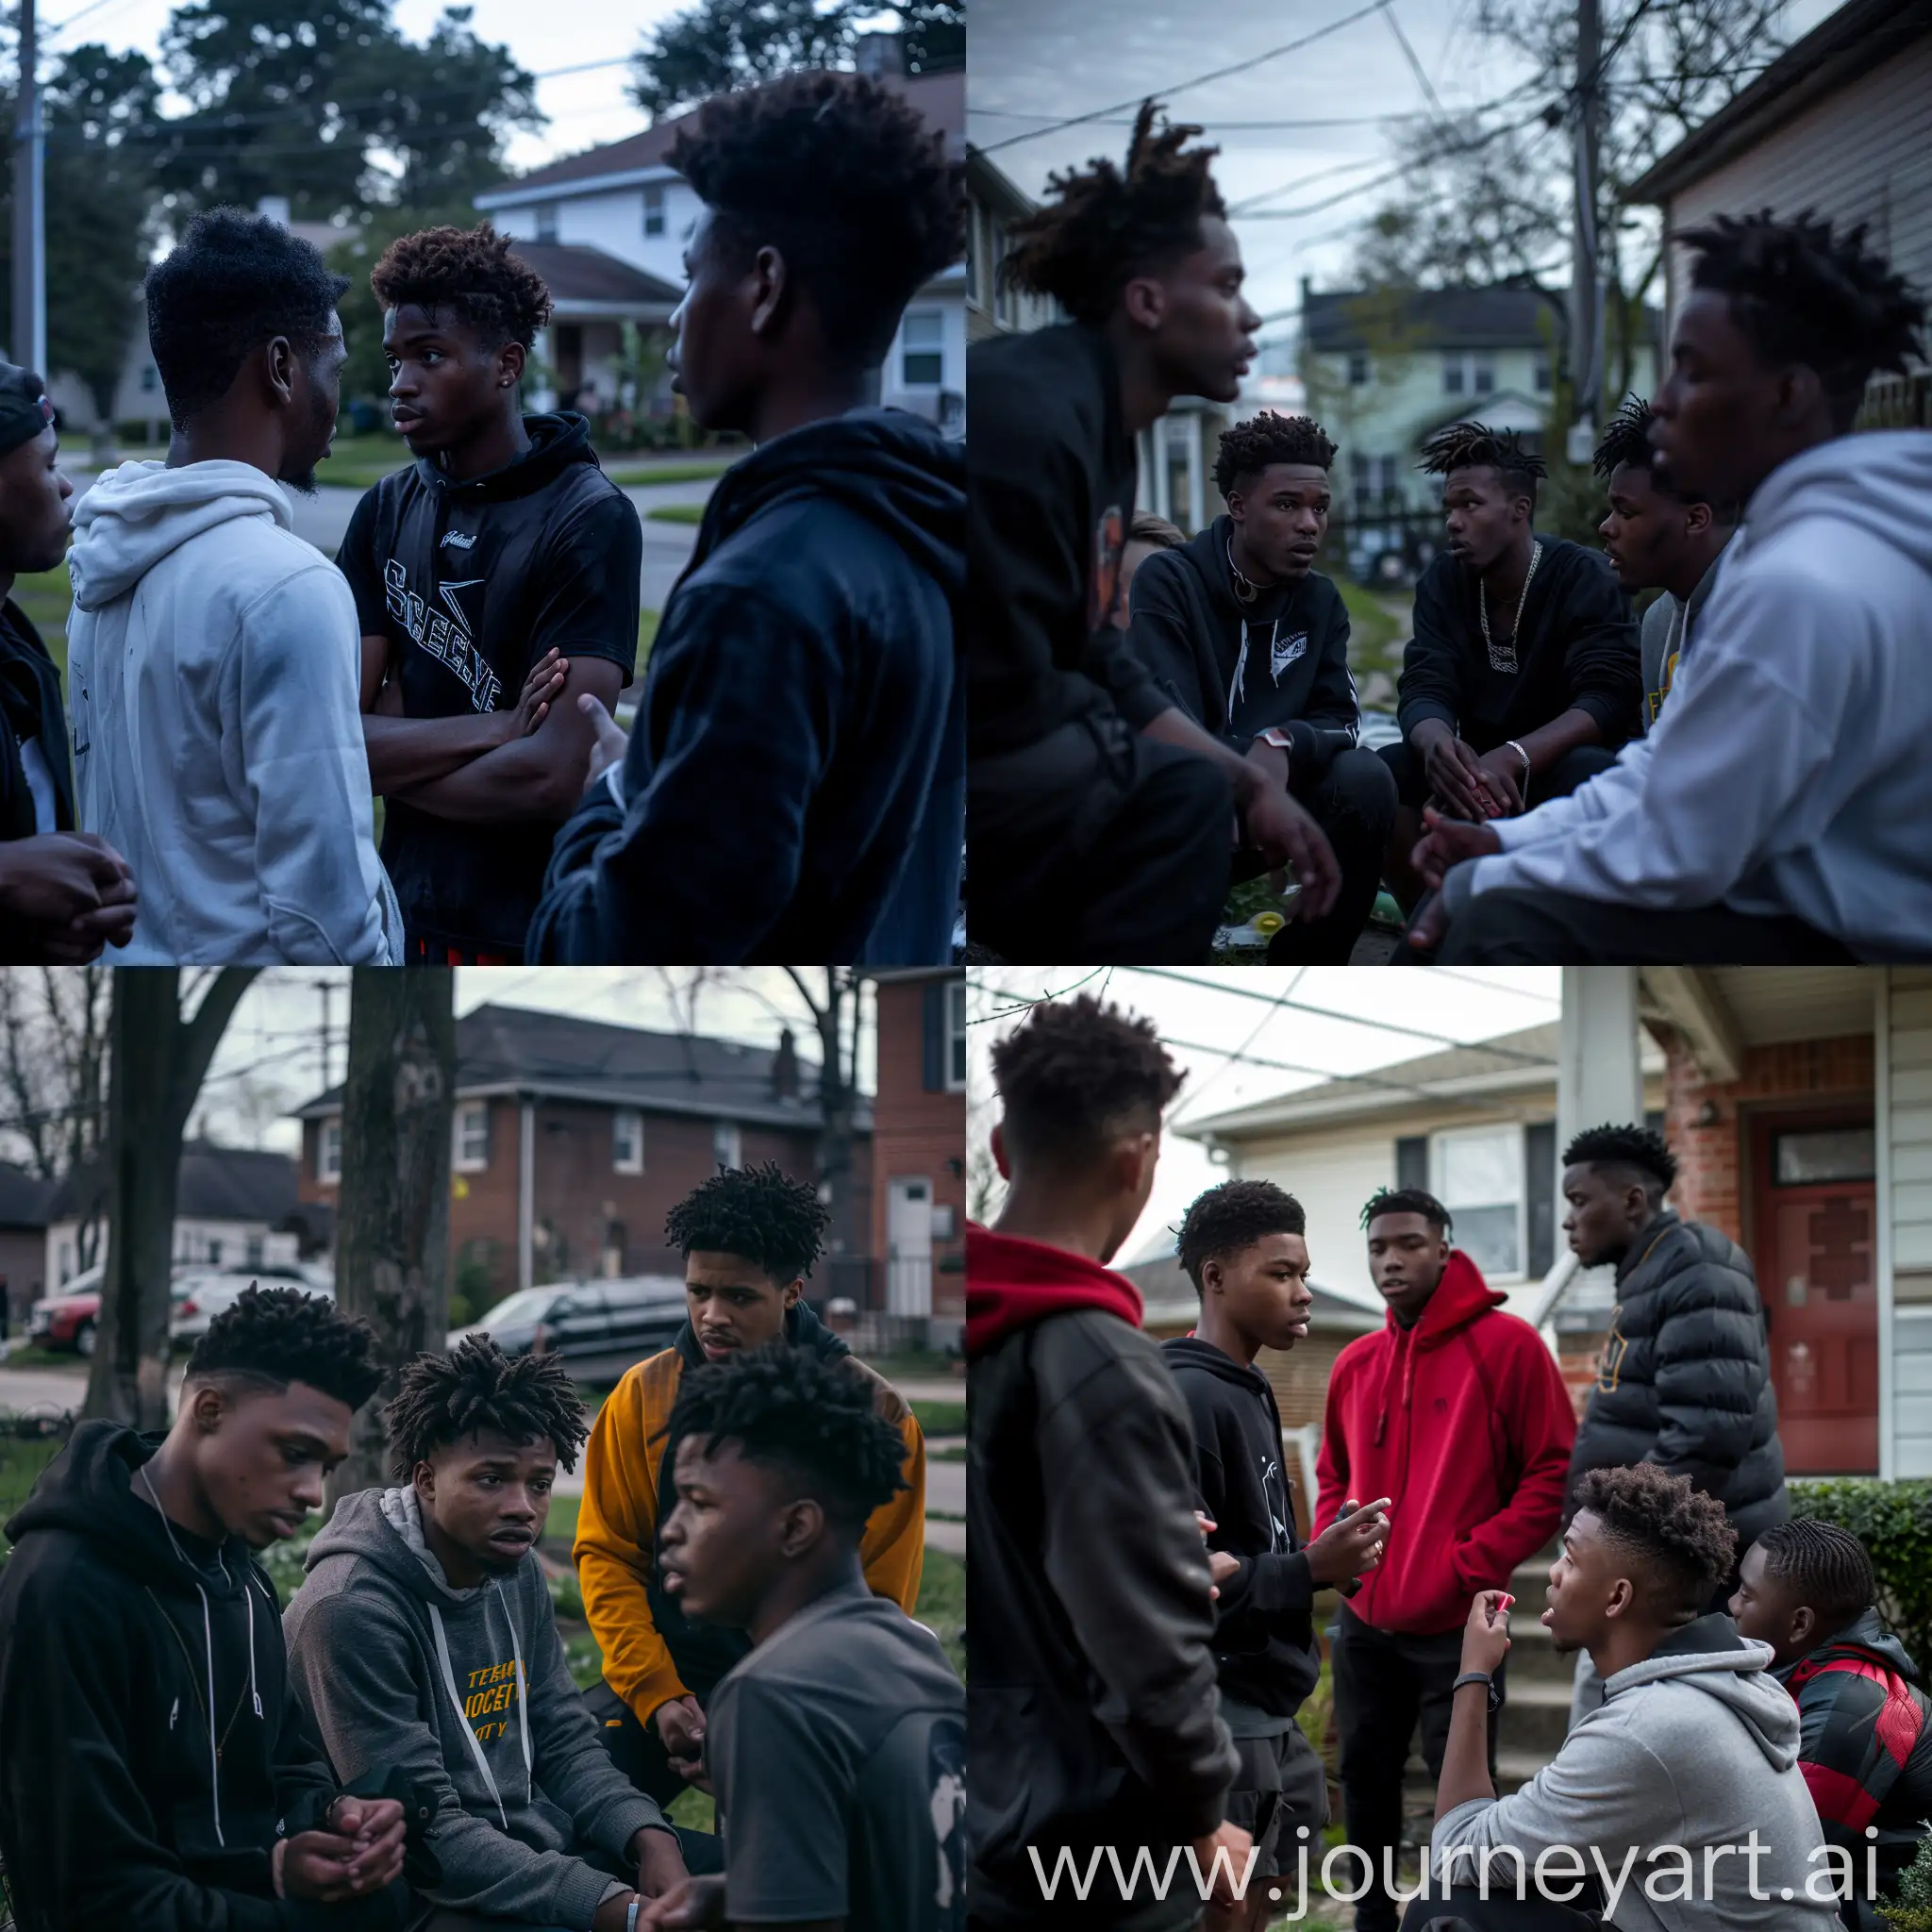 Temar Boggs and his friends are hanging out in their neighborhood when they hear the news about Jocelyn's disappearance. Concerned murmurs ripple through the group as they discuss what to do.* Create photos